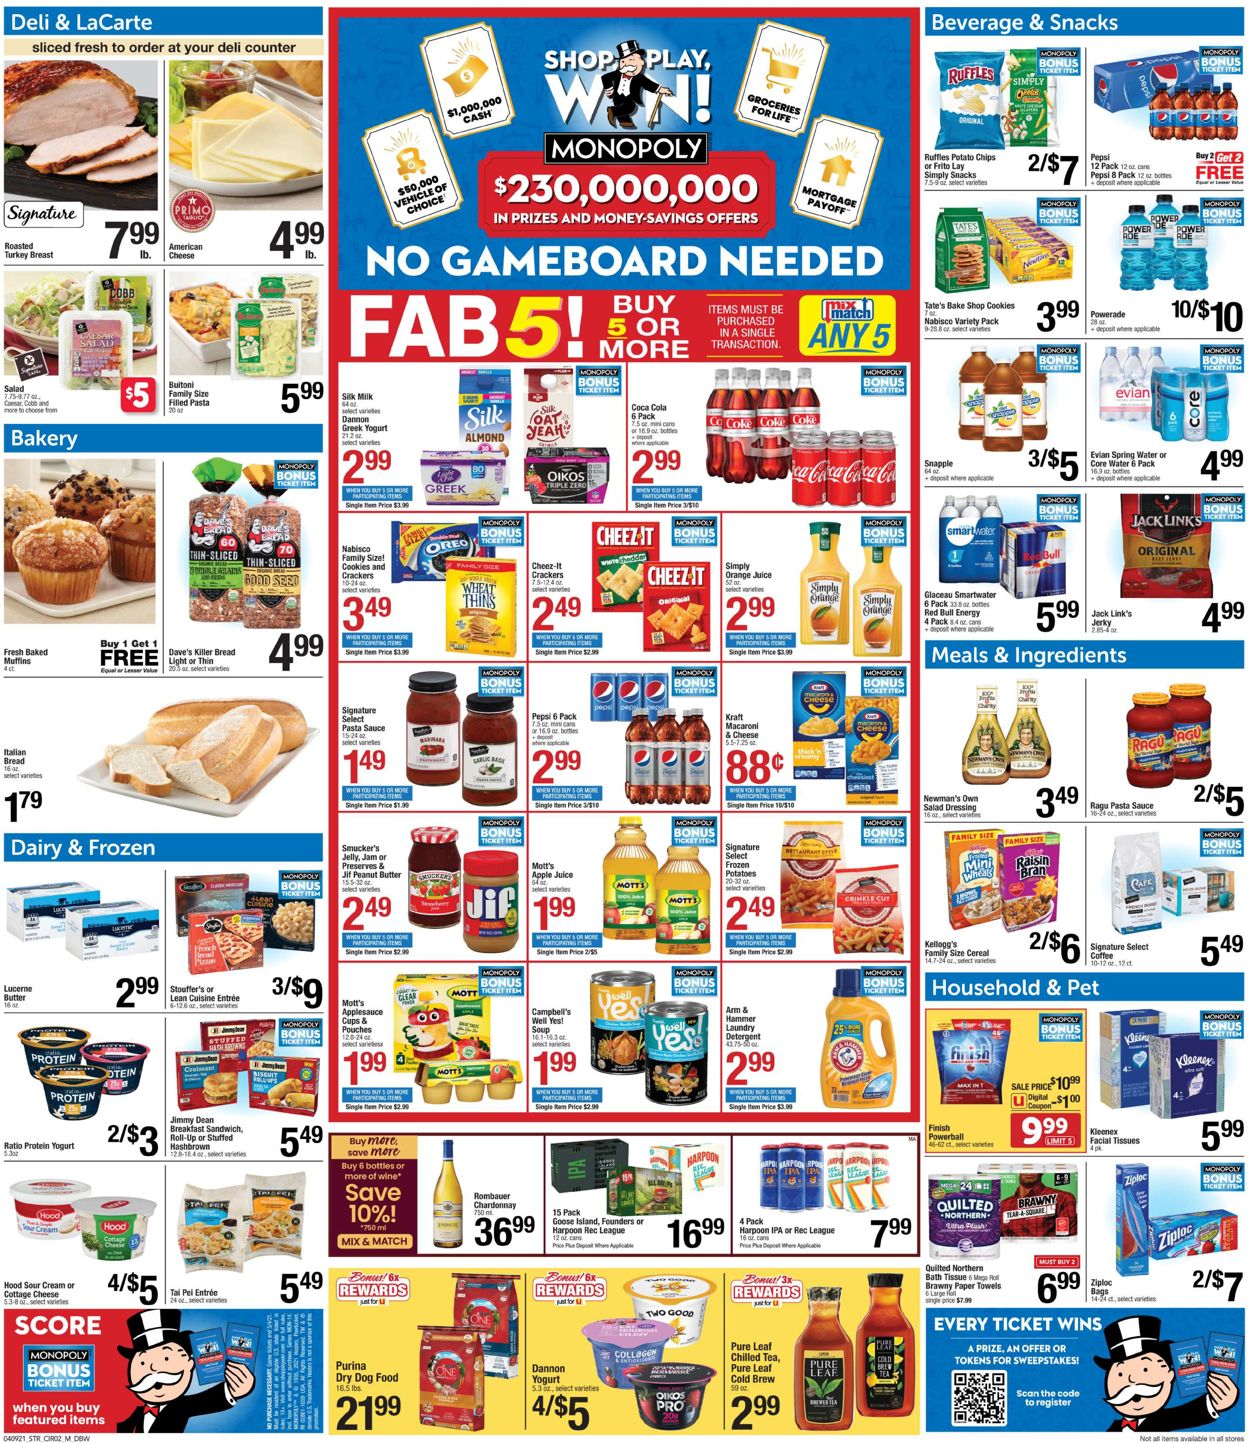 Star Market Ad from 04/09/2021